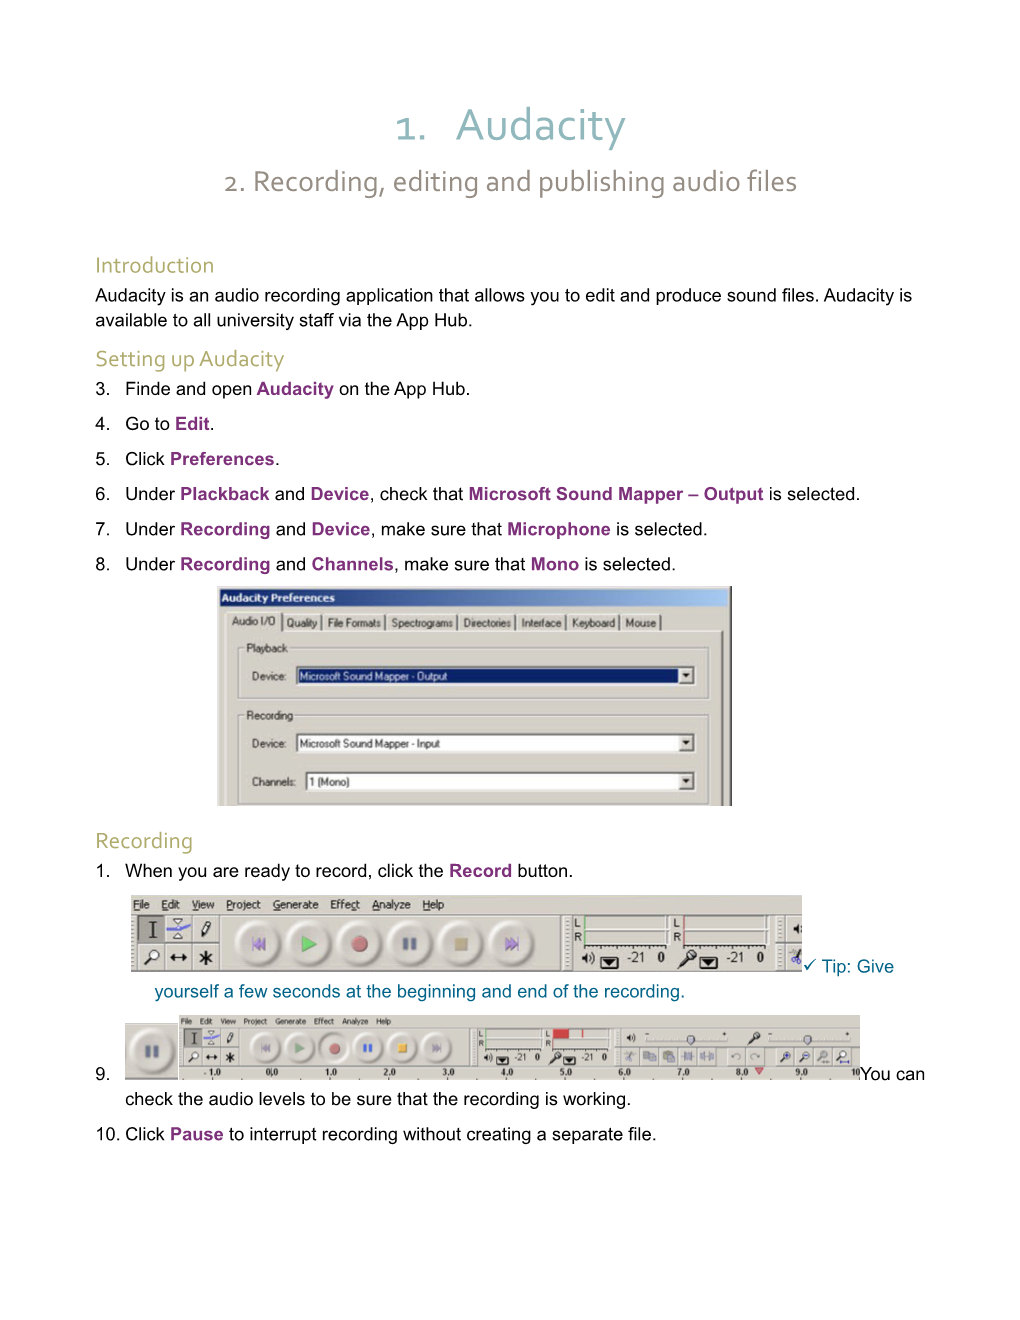 Recording, Editing and Publishing Audio Files